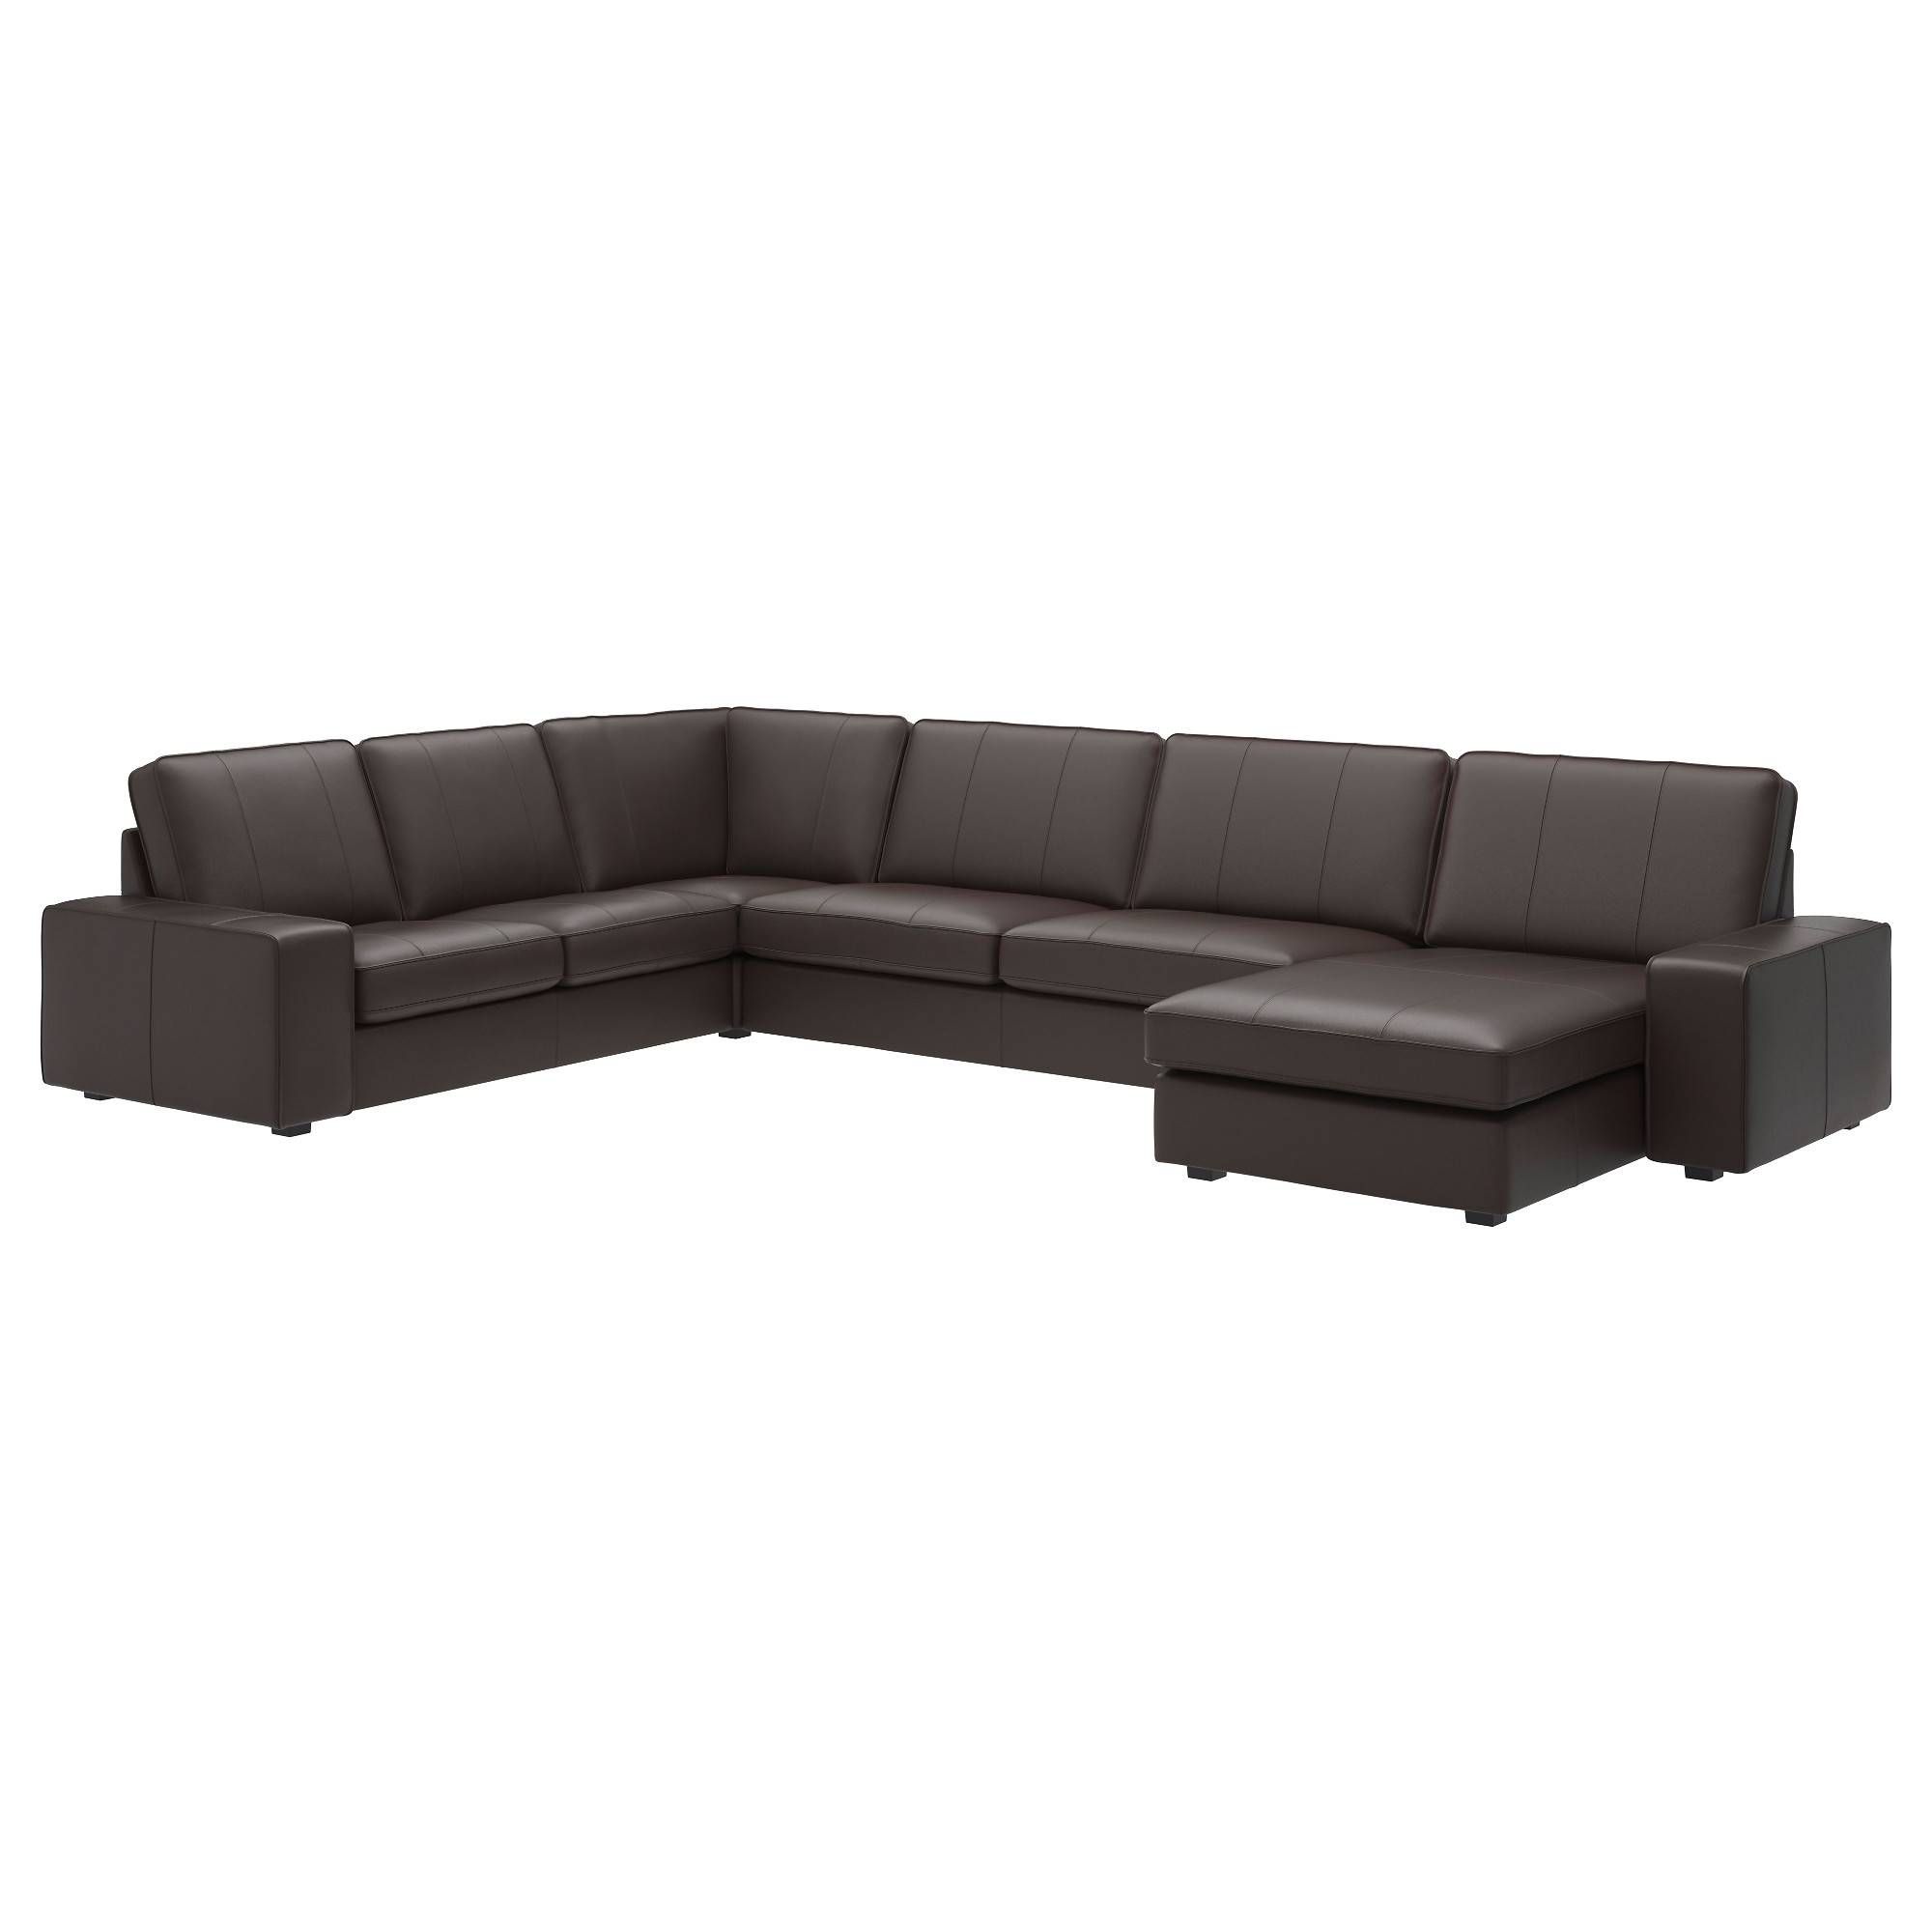 Leather & Faux Leather Couches, Chairs & Ottomans – Ikea In 10 Foot Sectional Sofa (Photo 136 of 299)